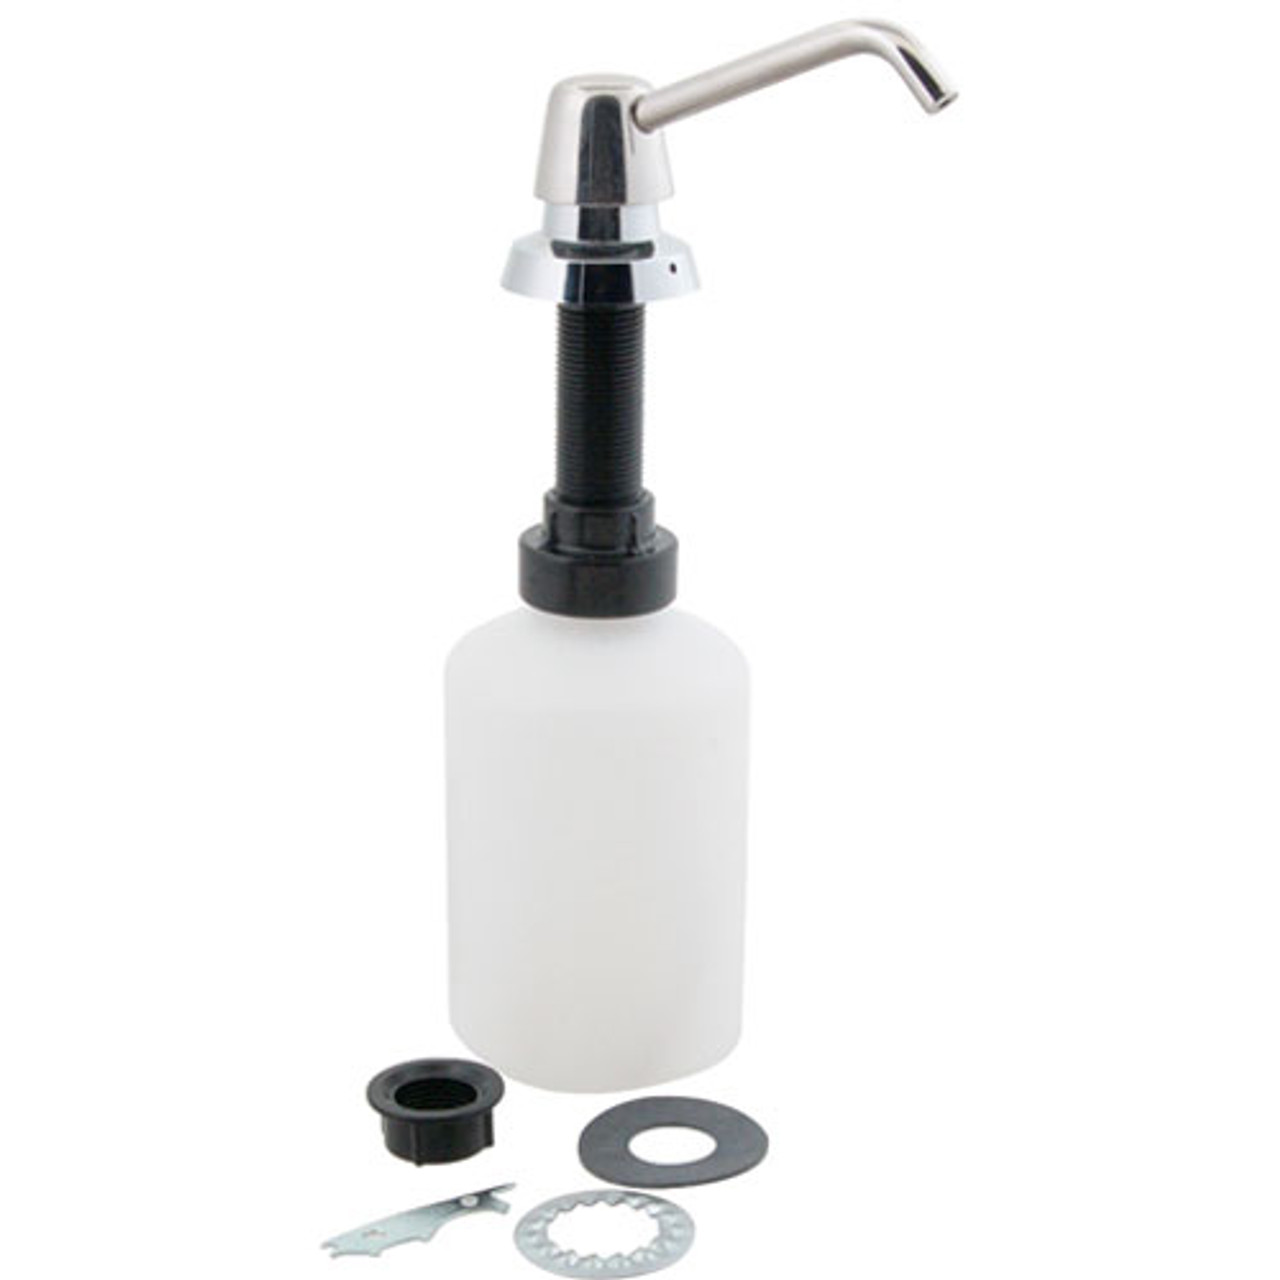 Soap Dispenser - Replacement Part For Bobrick B8221